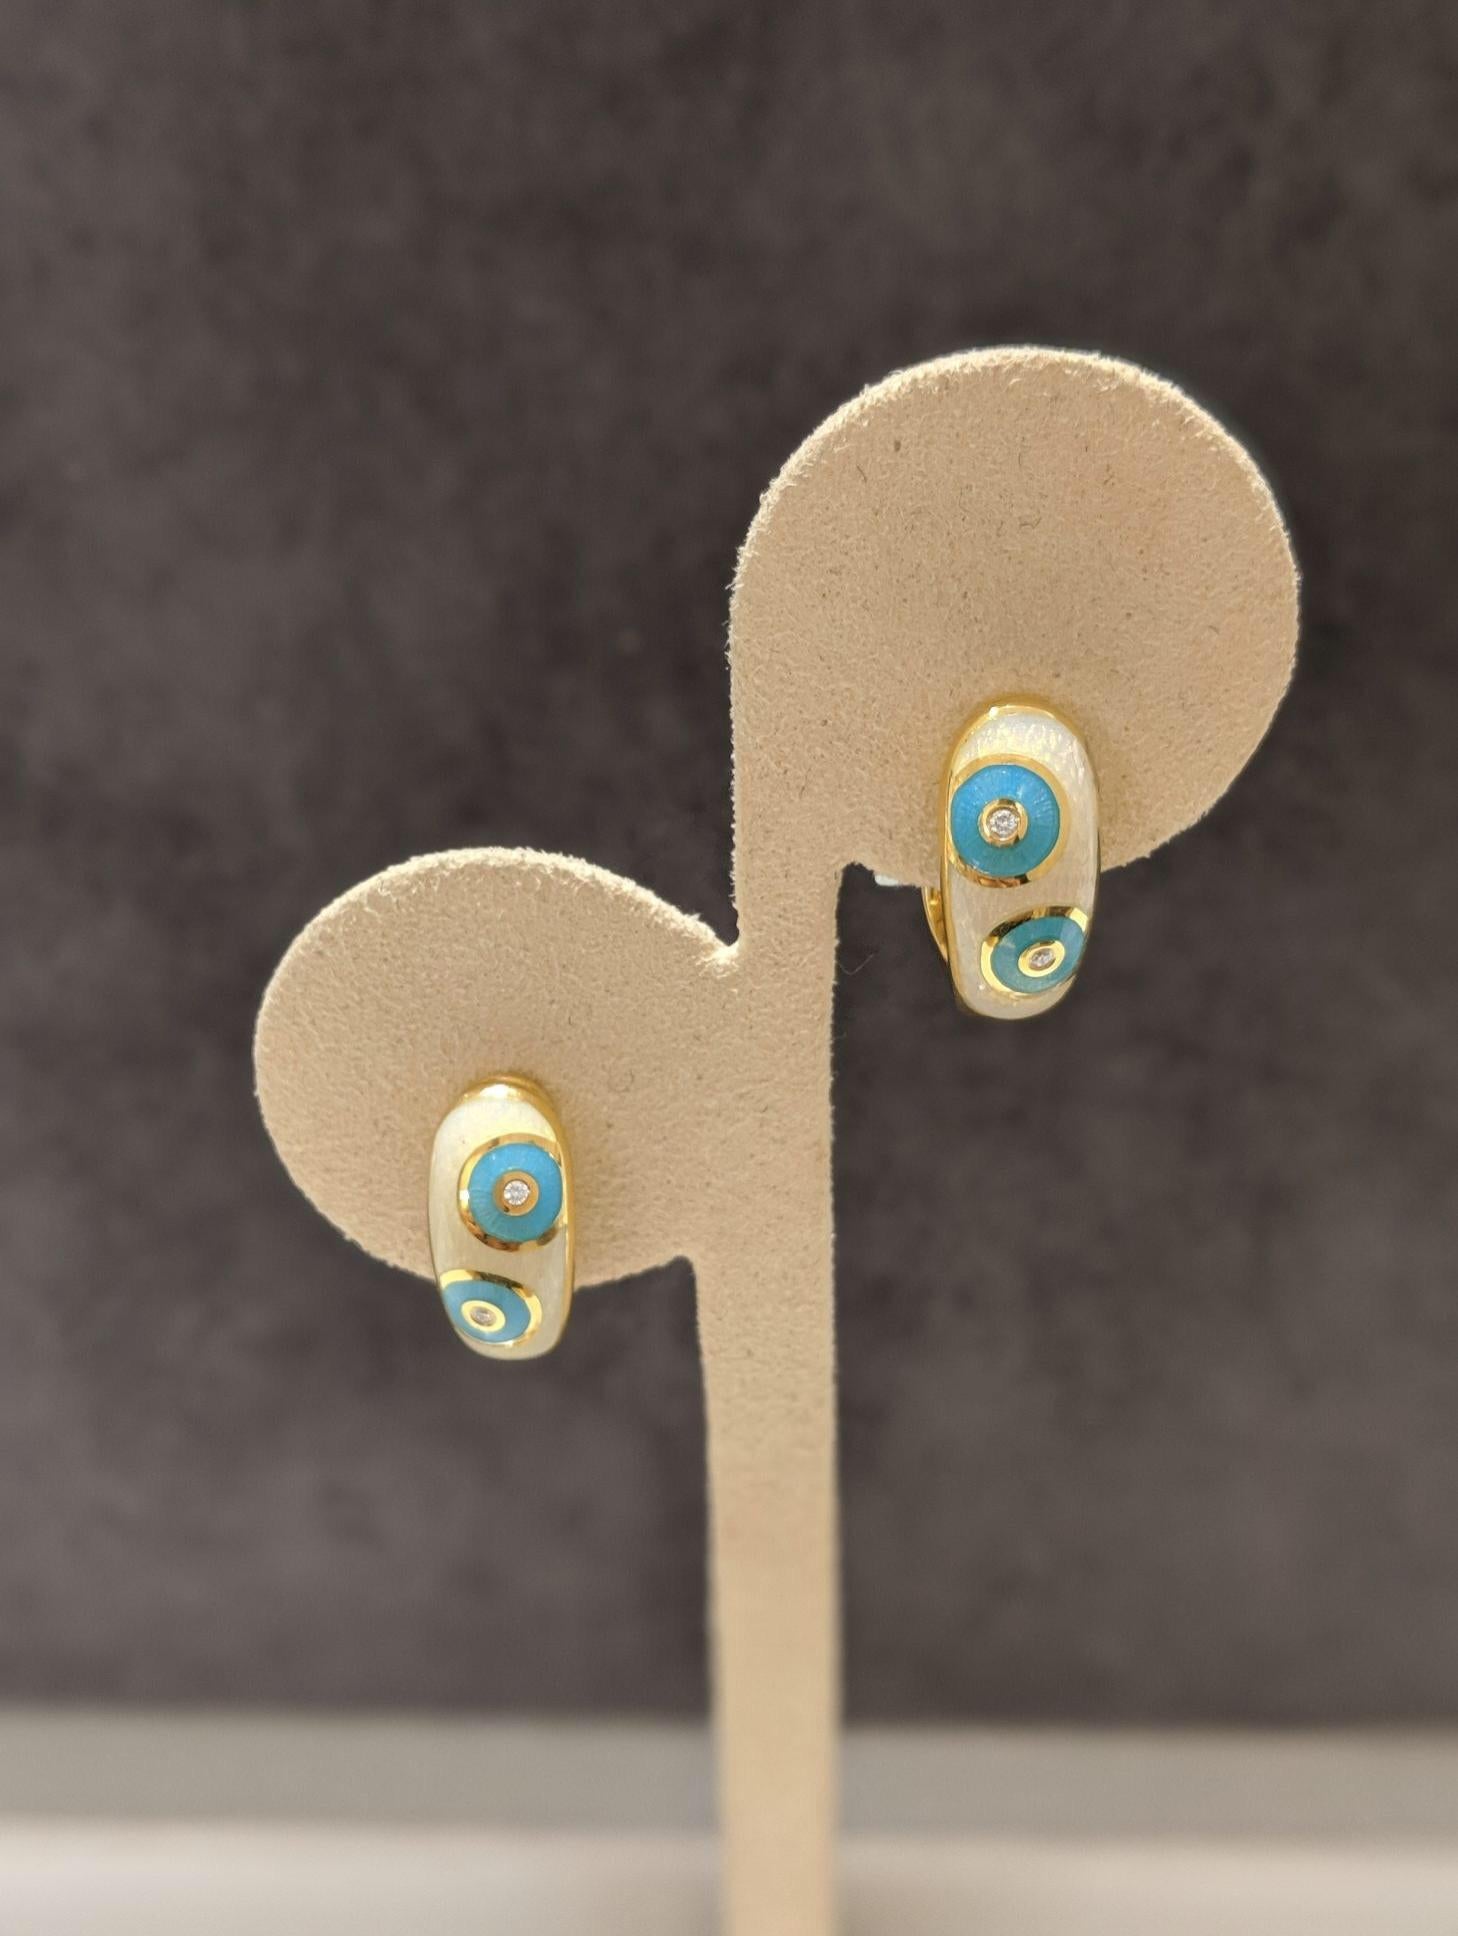 These classic huggy earrings are crafted using the traditional Faberge guicholle enameling technique.
Crafted with seven layers of white and turquoise enamel in a dot pattern and further enhanced with round brilliant diamonds. These earring are with